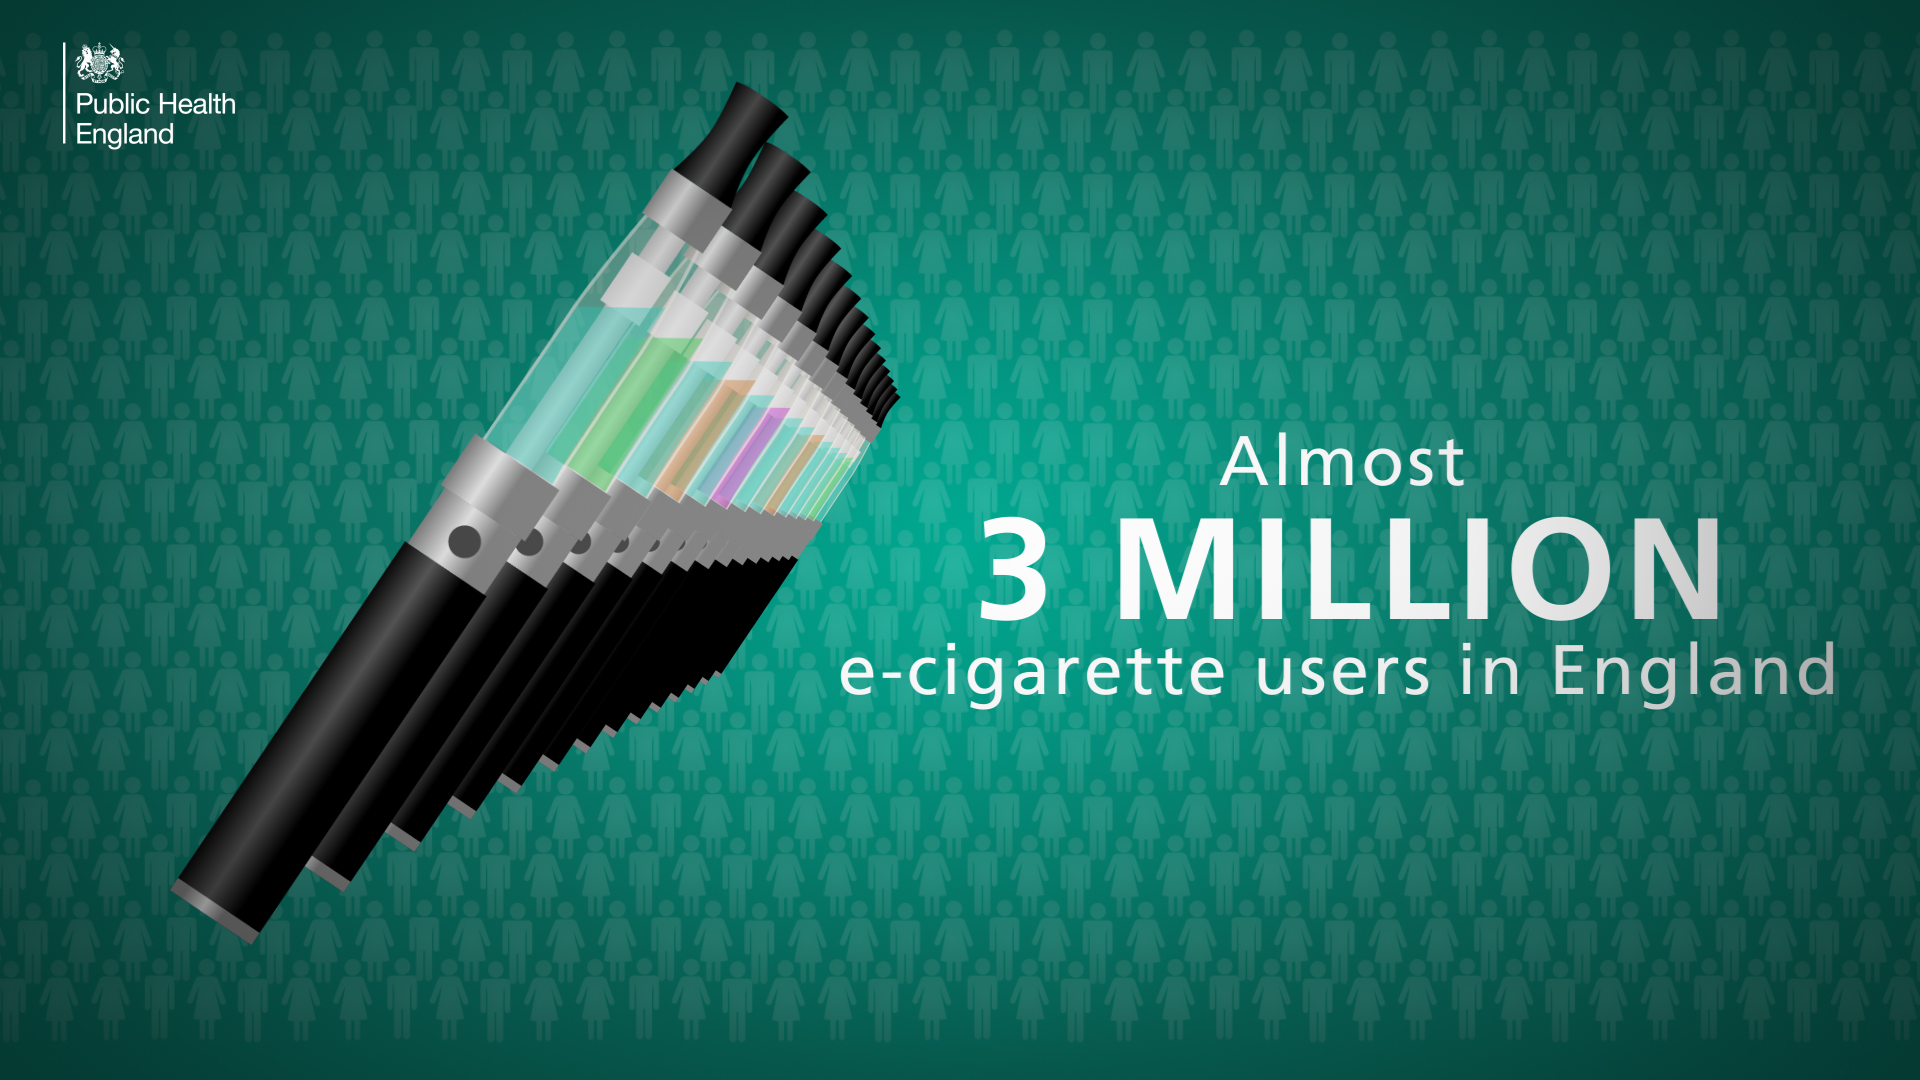 Clearing up some myths around e-cigarettes - Public health matters